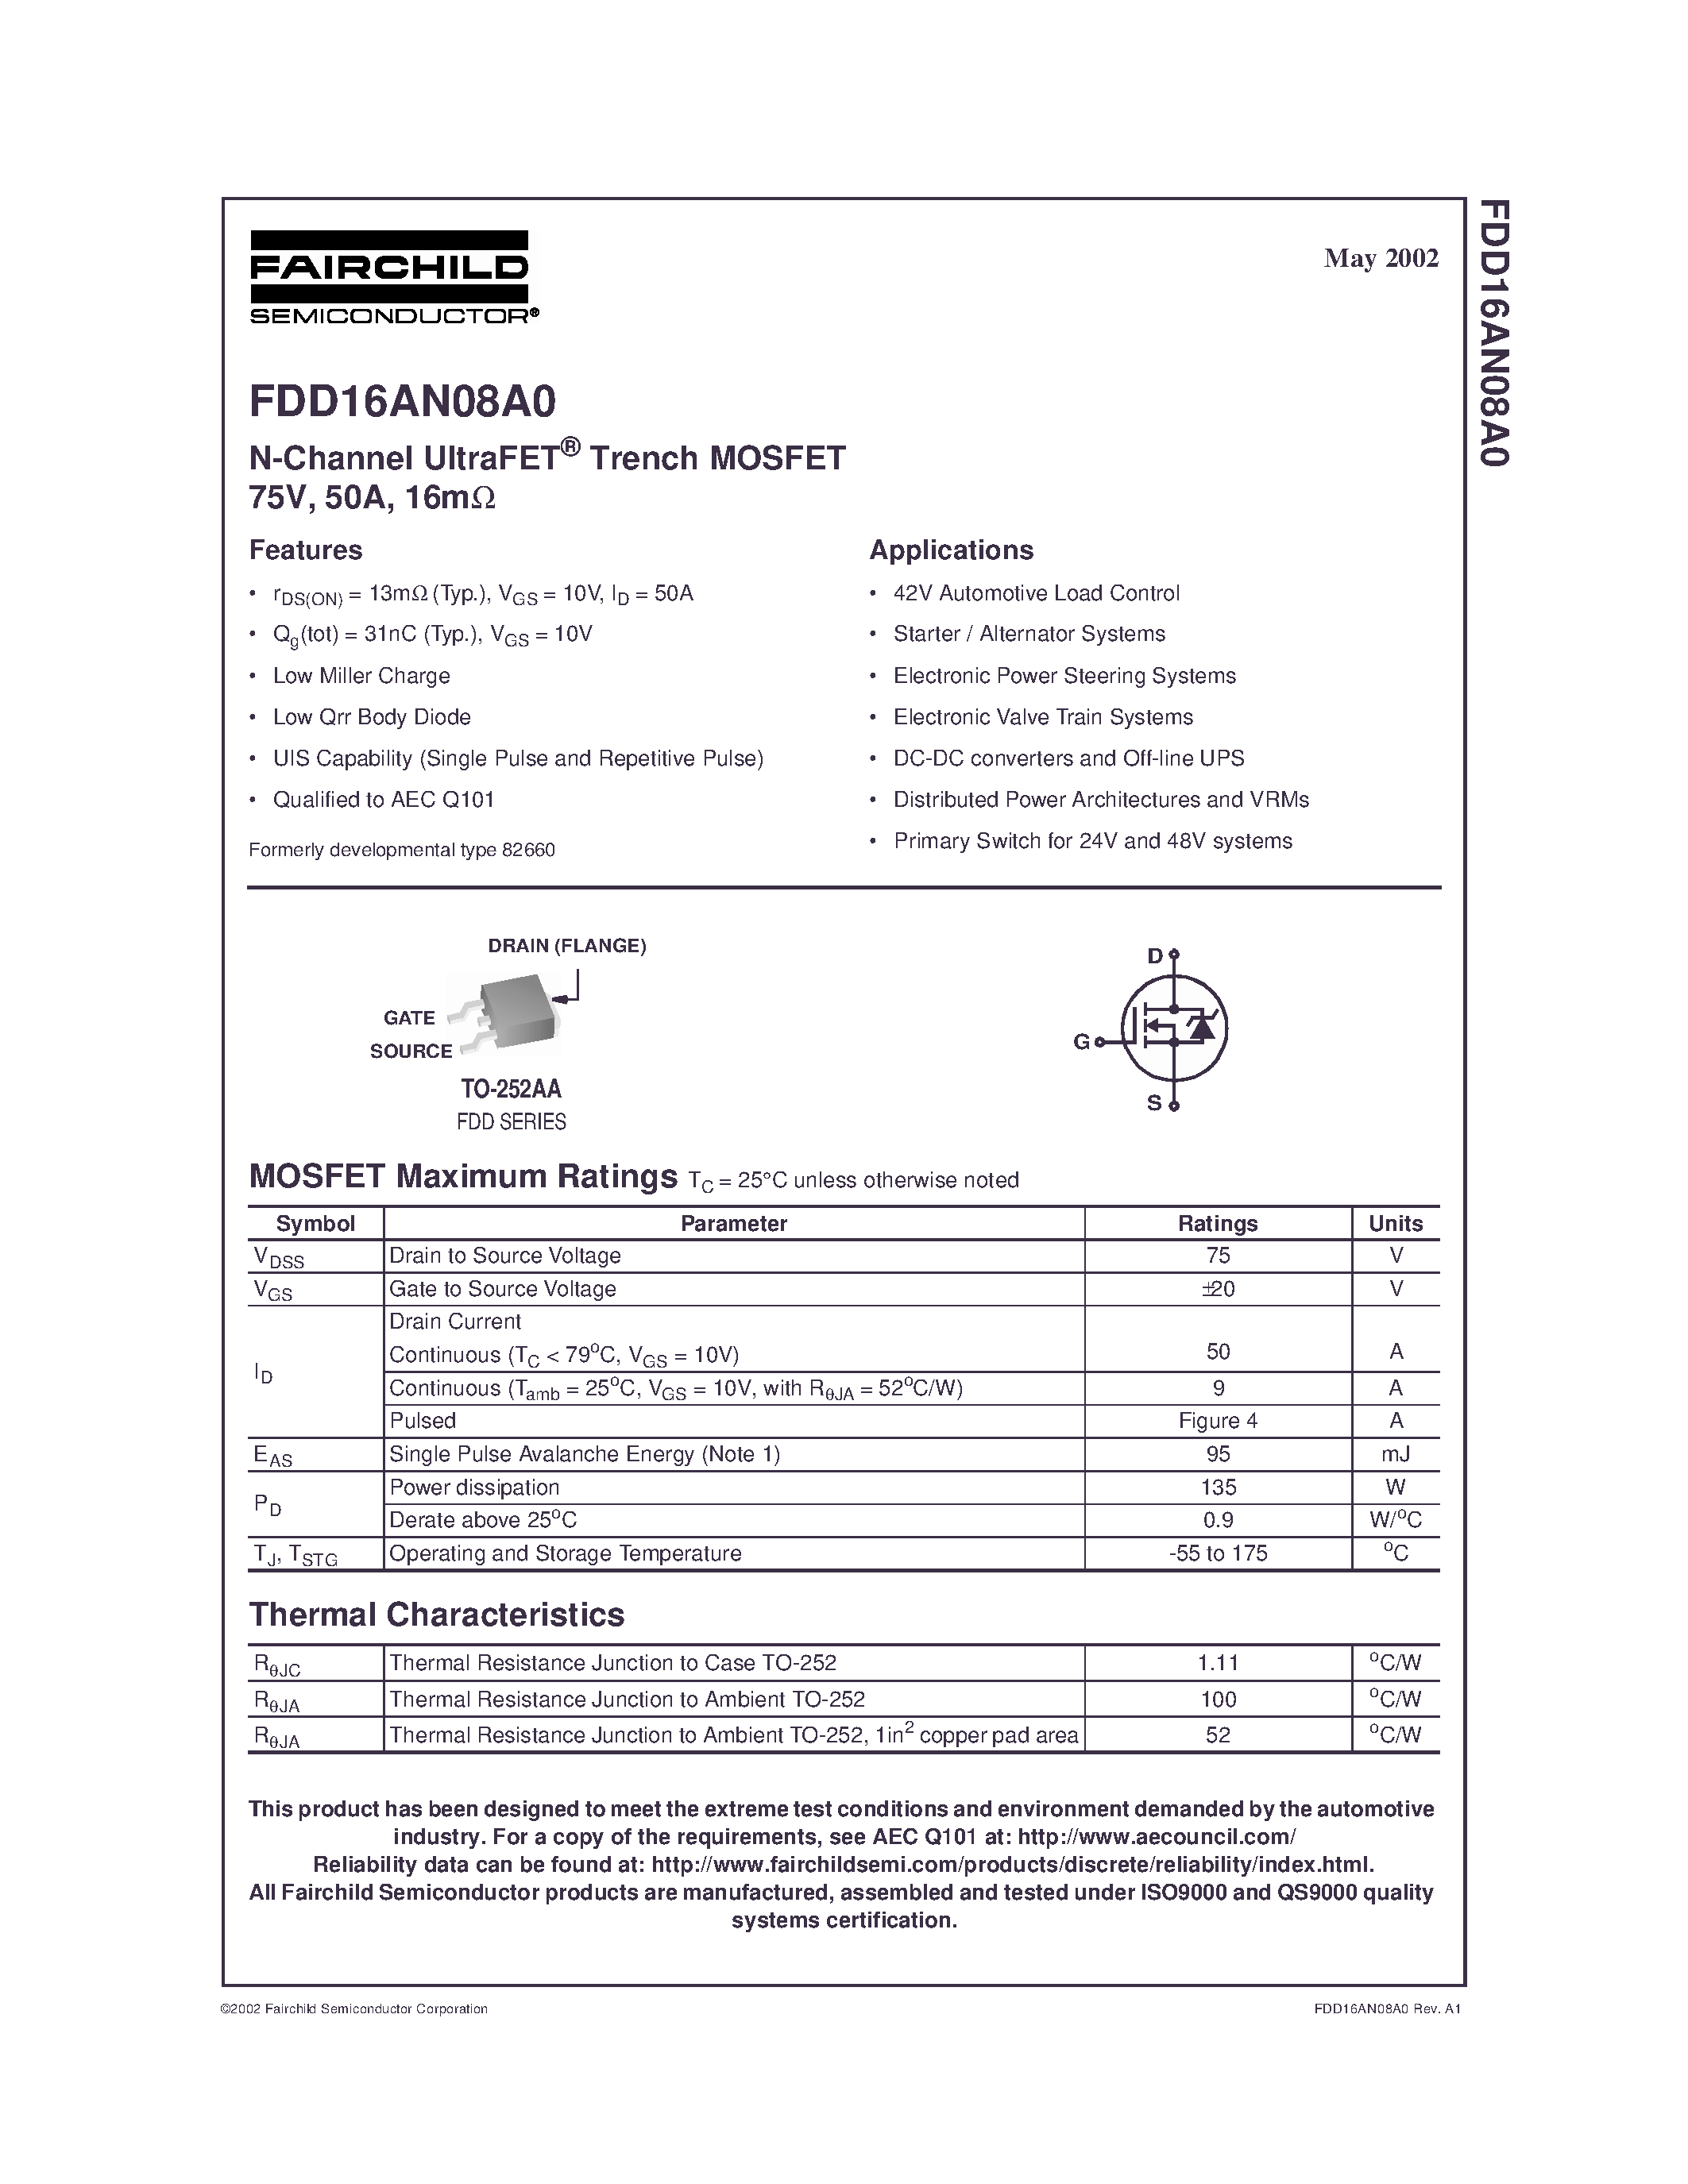 Datasheet FDD16AN08A0 - N-Channel UltraFET Trench MOSFET 75V/ 50A/ 16m page 1